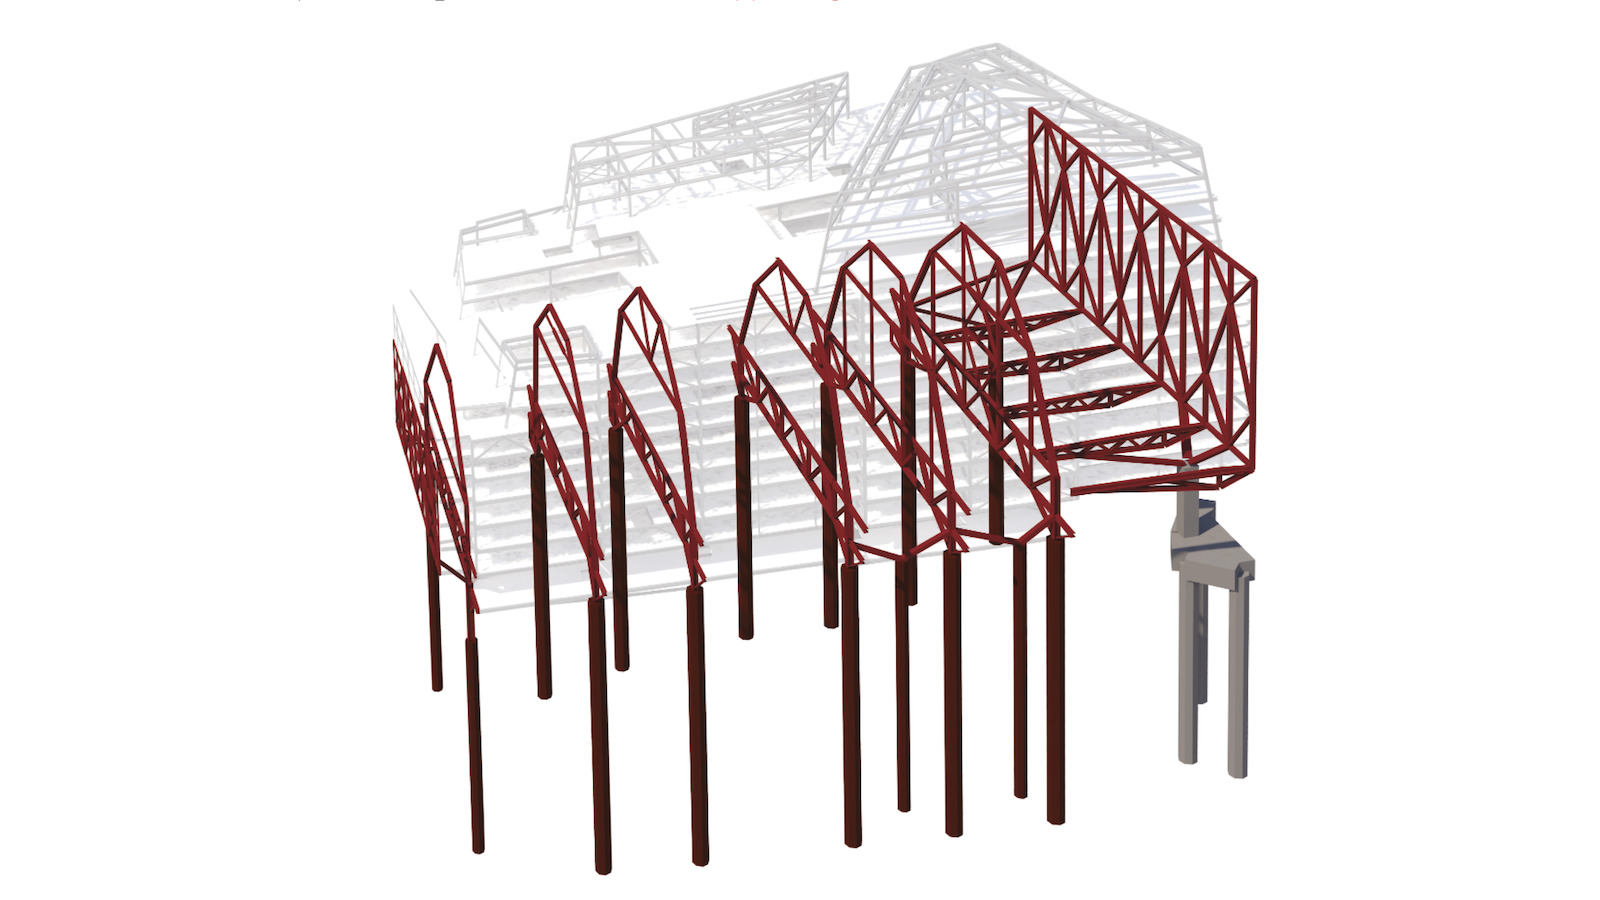 3D model showing the six long-span arches and supporting trusses